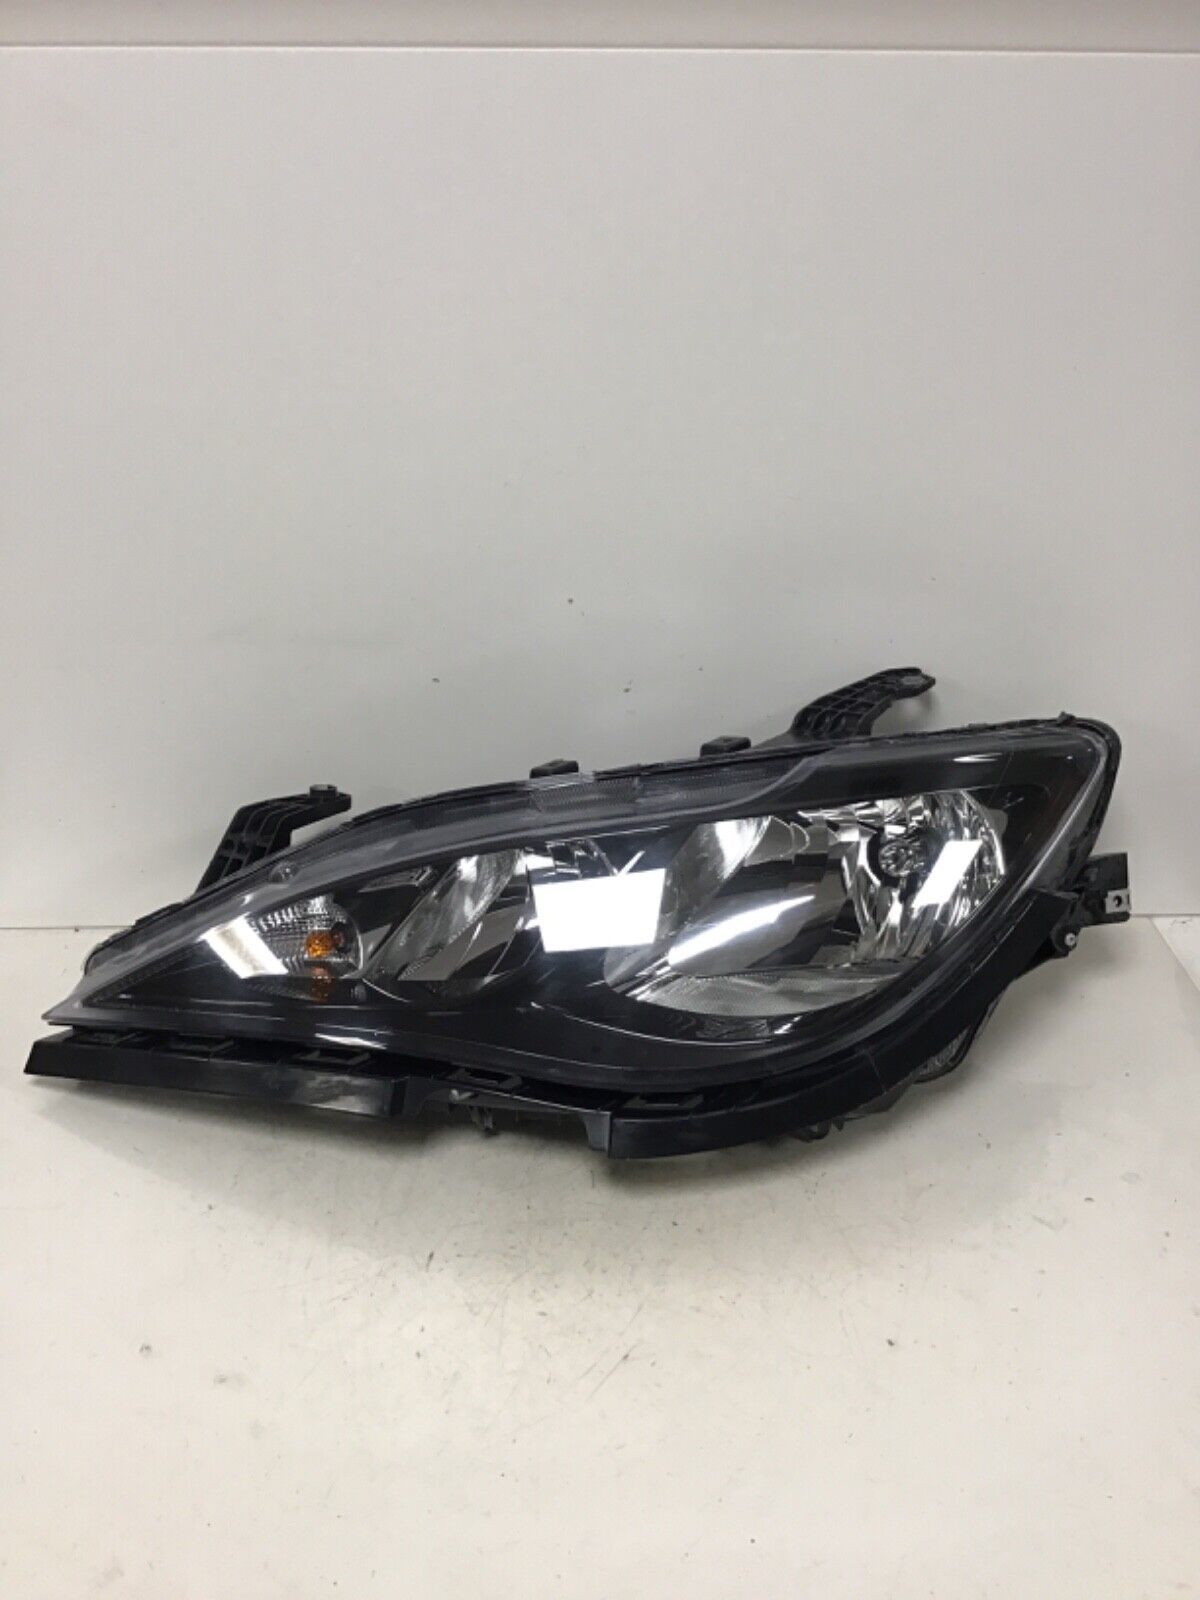 Primary image for FITS 2017 2018 2019 CHRYSLER PACIFICA LH HALOGEN HEADLIGHT AFT TYC C94L 11056